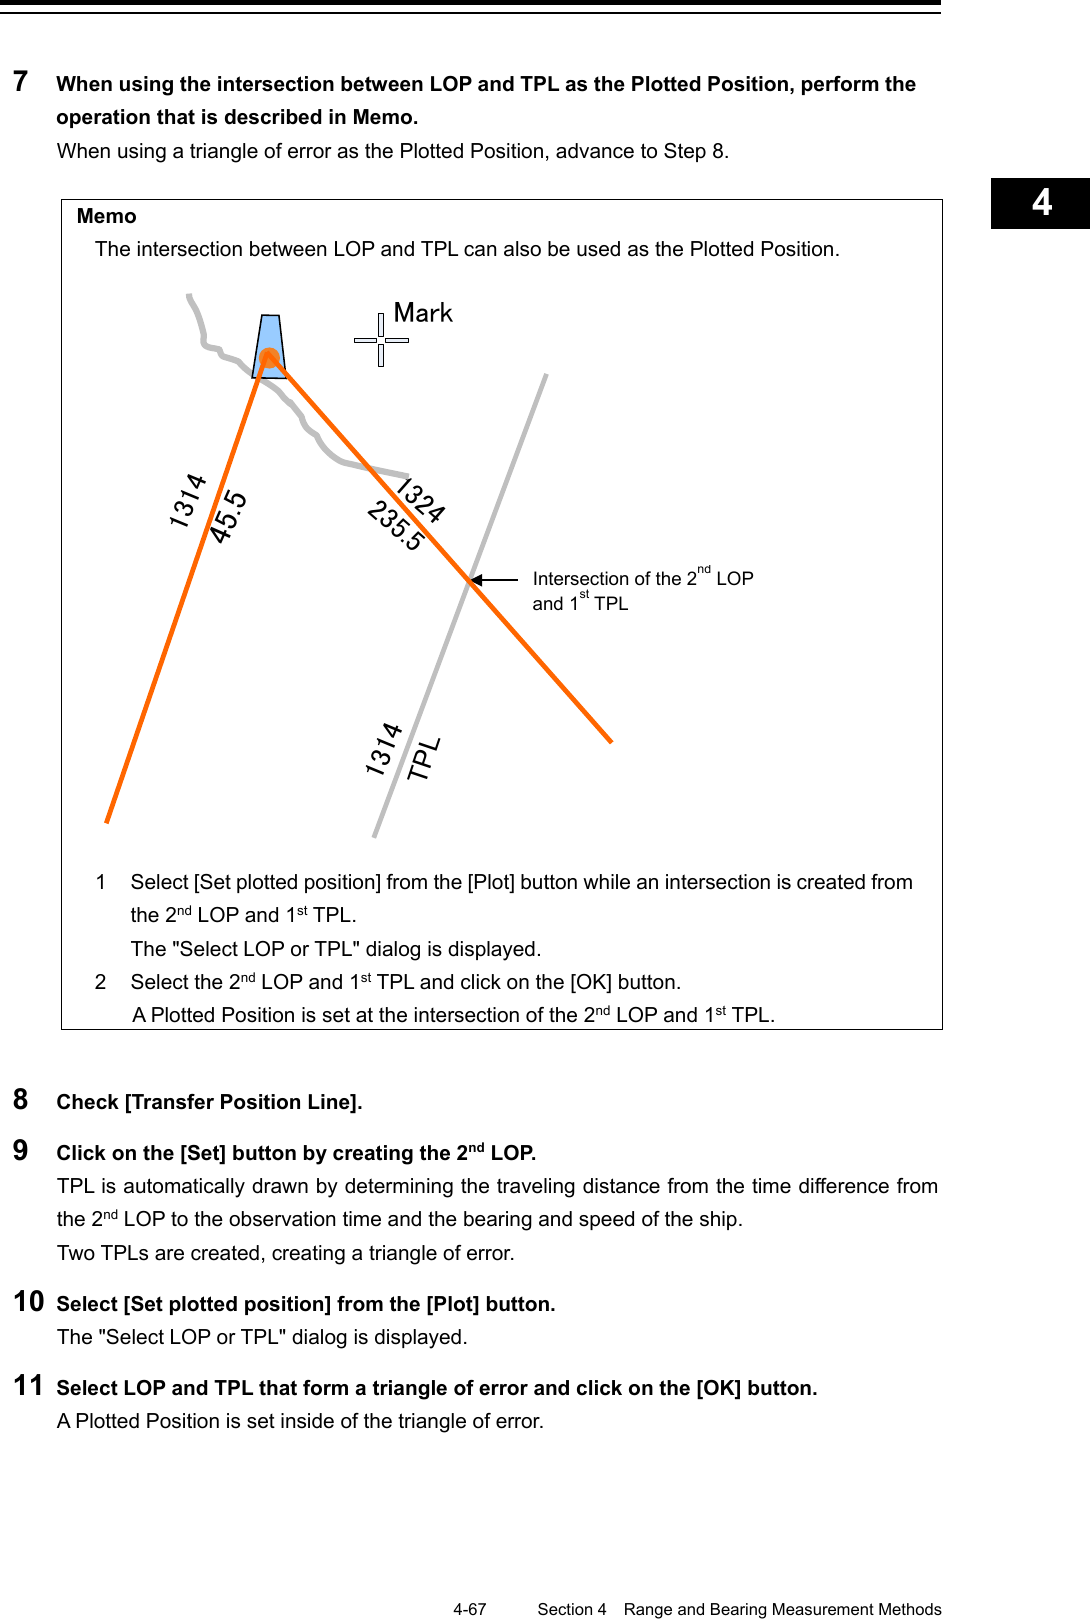    4-67  Section 4  Range and Bearing Measurement Methods    1  2  3  4  5  6  7  8  9  10  11  12  13  14  15  16  17  18  19  20  21  22  23  24  25  APP A   APP B  1    7  When using the intersection between LOP and TPL as the Plotted Position, perform the operation that is described in Memo. When using a triangle of error as the Plotted Position, advance to Step 8.  Memo The intersection between LOP and TPL can also be used as the Plotted Position.  1  Select [Set plotted position] from the [Plot] button while an intersection is created from the 2nd LOP and 1st TPL.  The &quot;Select LOP or TPL&quot; dialog is displayed. 2  Select the 2nd LOP and 1st TPL and click on the [OK] button. A Plotted Position is set at the intersection of the 2nd LOP and 1st TPL.  8  Check [Transfer Position Line]. 9  Click on the [Set] button by creating the 2nd L O P.  TPL is automatically drawn by determining the traveling distance from the time difference from the 2nd LOP to the observation time and the bearing and speed of the ship.   Two TPLs are created, creating a triangle of error. 10 Select [Set plotted position] from the [Plot] button. The &quot;Select LOP or TPL&quot; dialog is displayed. 11 Select LOP and TPL that form a triangle of error and click on the [OK] button. A Plotted Position is set inside of the triangle of error.   1324235.5  TPL45.513141314Intersection of the 2nd LOP and 1st TPL   Mark